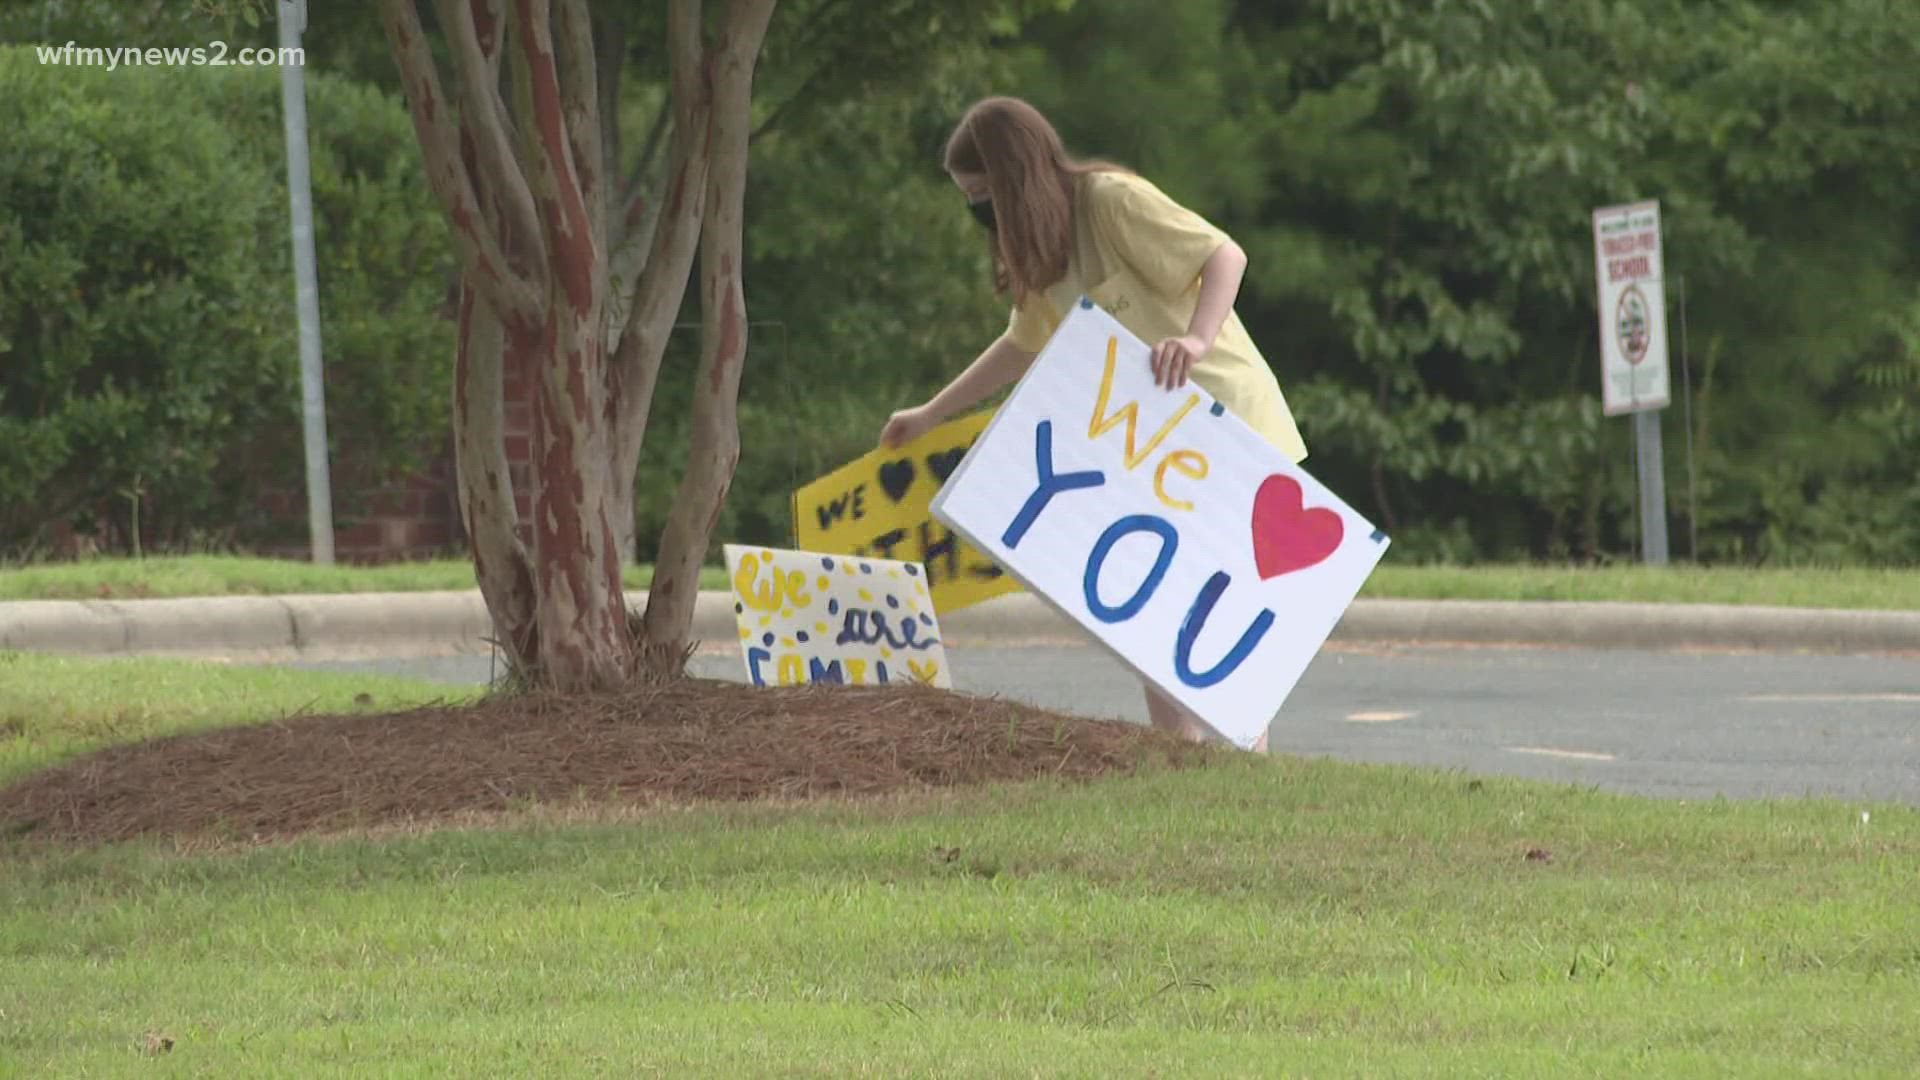 They wrote encouraging messages to students as they come back to school days after a deadly shooting on campus.